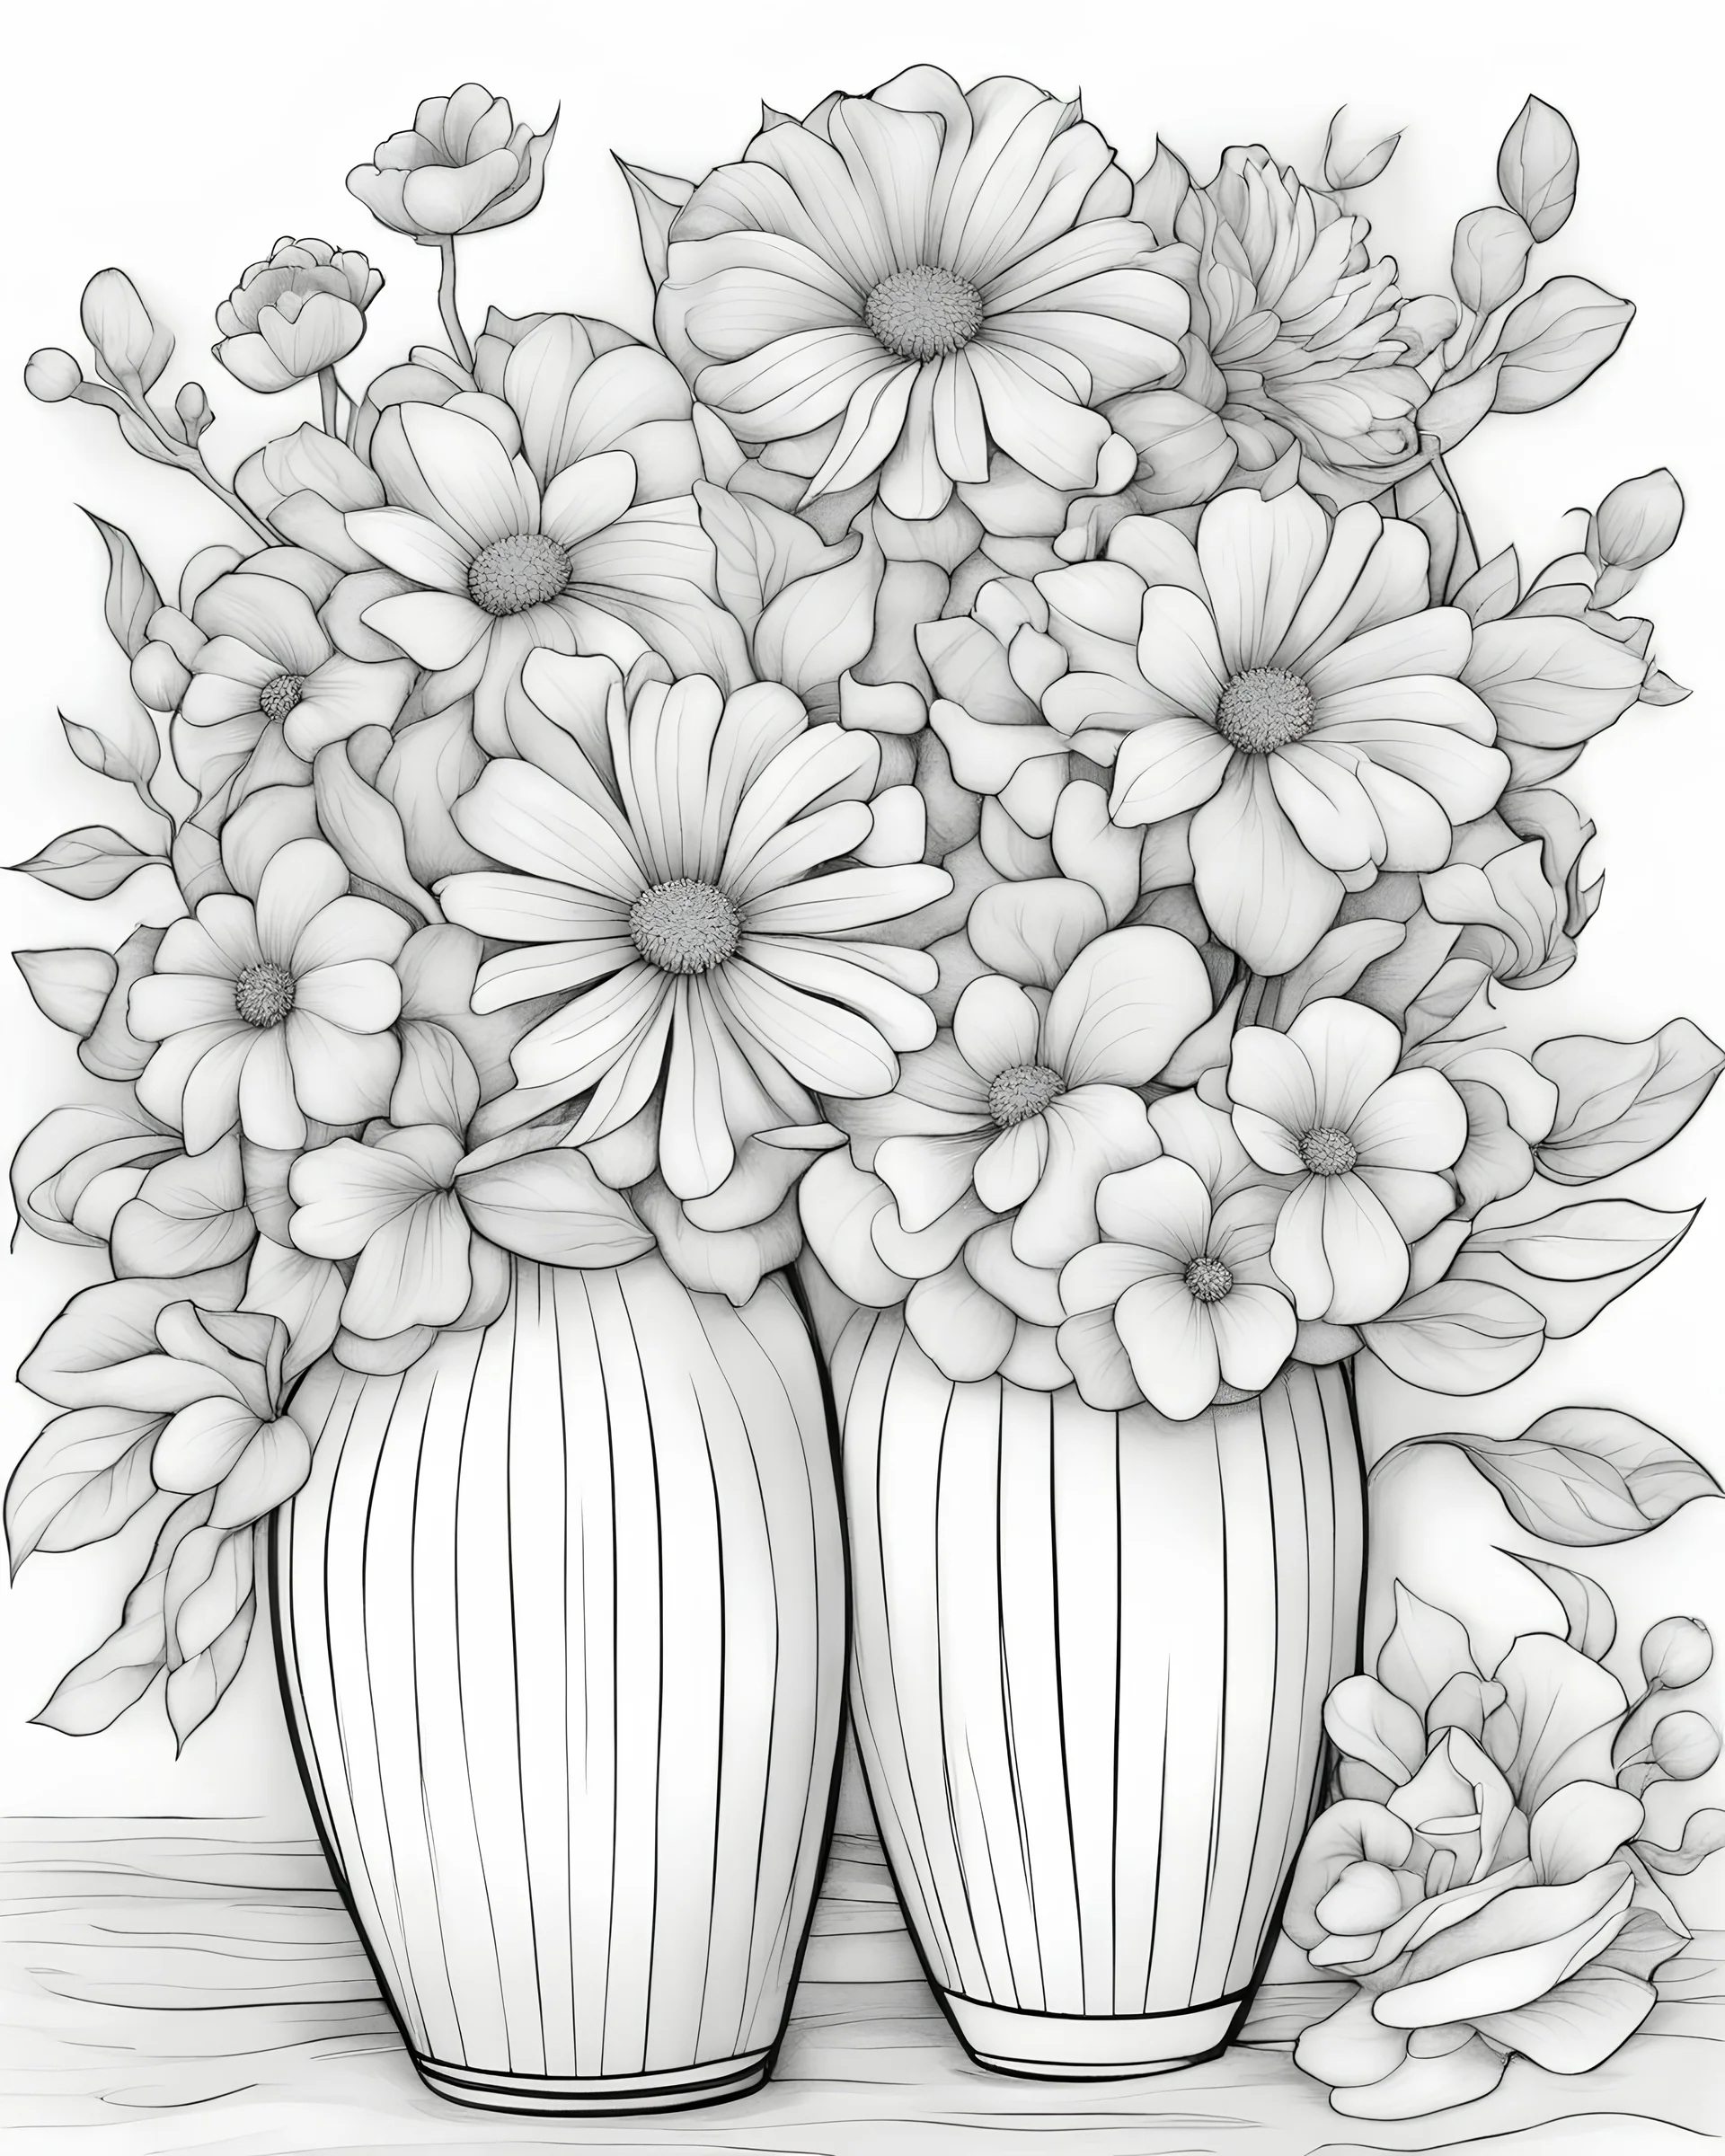 Free Vase And Flowers Coloring Page, Download Free Vase And Flowers  Coloring Page png images, Free ClipArts on Clipart Library